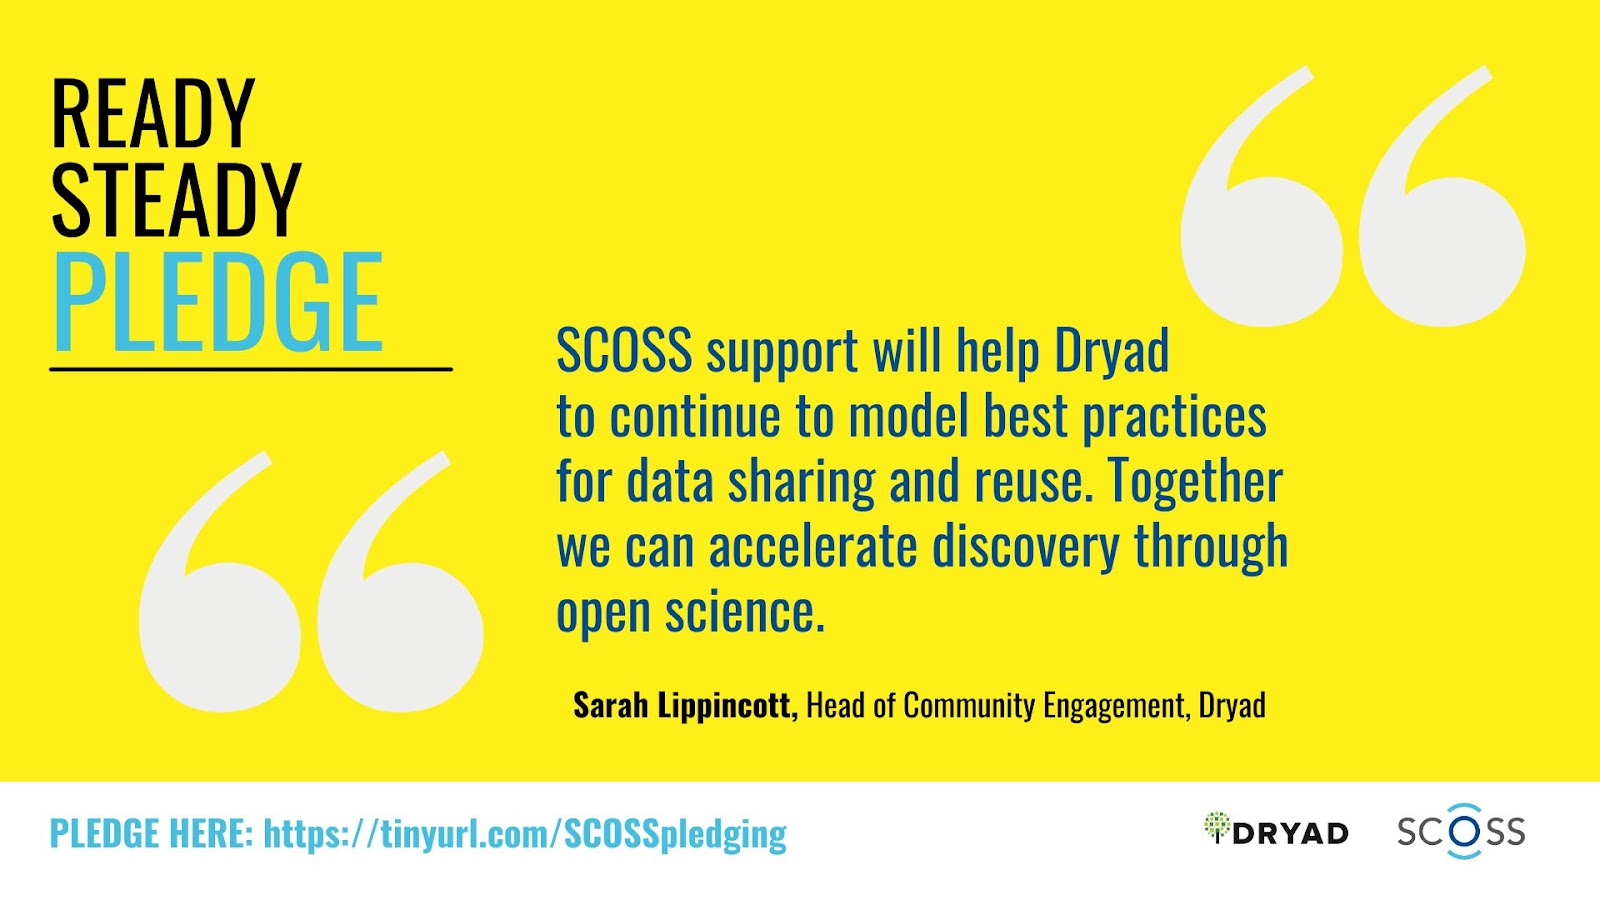 Text reading "Ready, steady, pledge" and a quote attributed to Sarah Lippincott, Head of Community Engagement at Dryad: "SCOSS support will help Dryad to continue to model best practices for data sharing and reuse. Together we can accelerate discovery through open science."